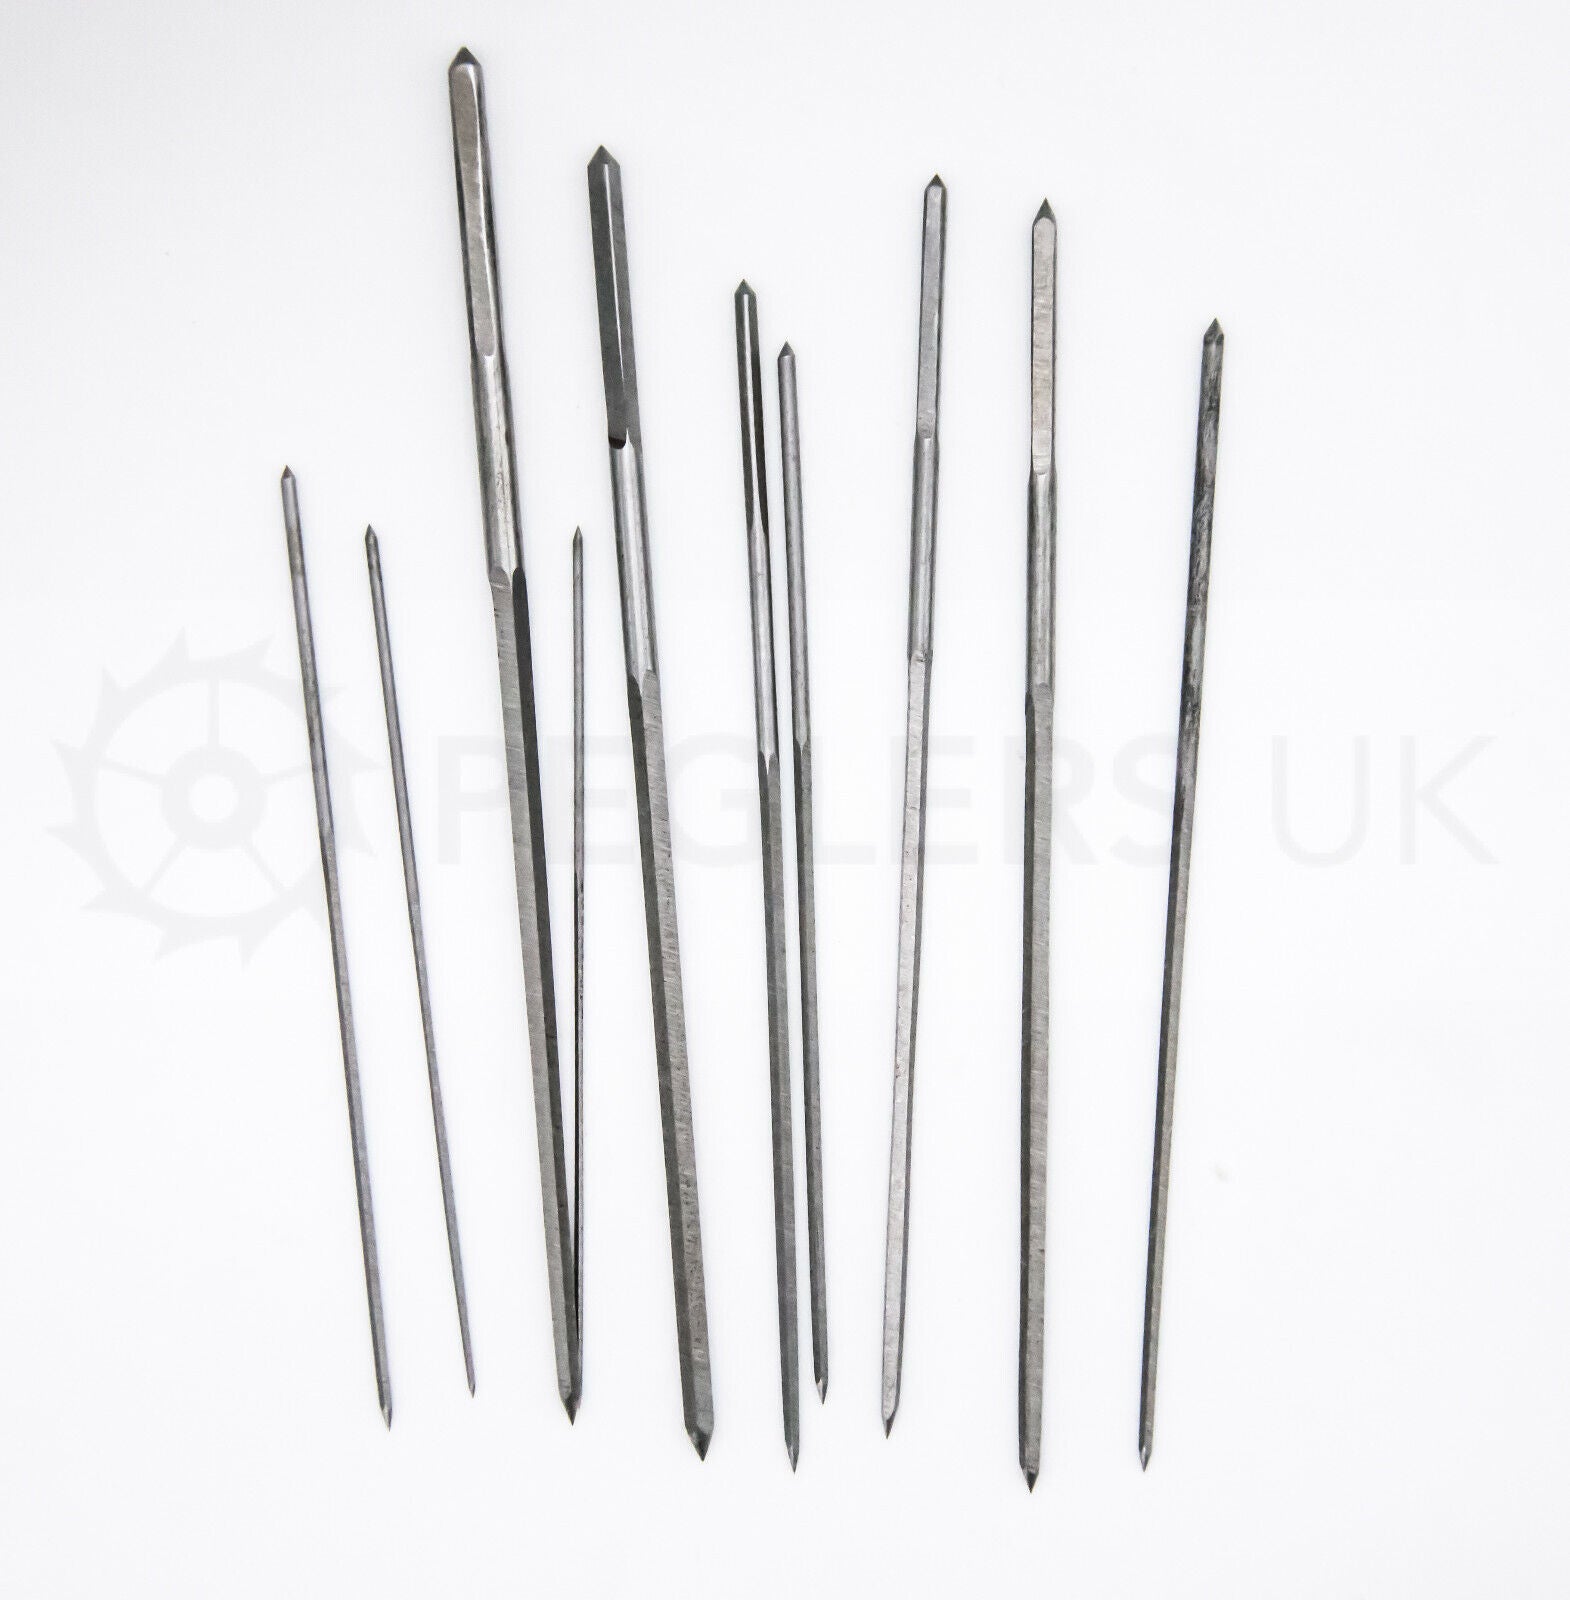 Set of 10x Cutting Broaches 0.8 - 2.6mm